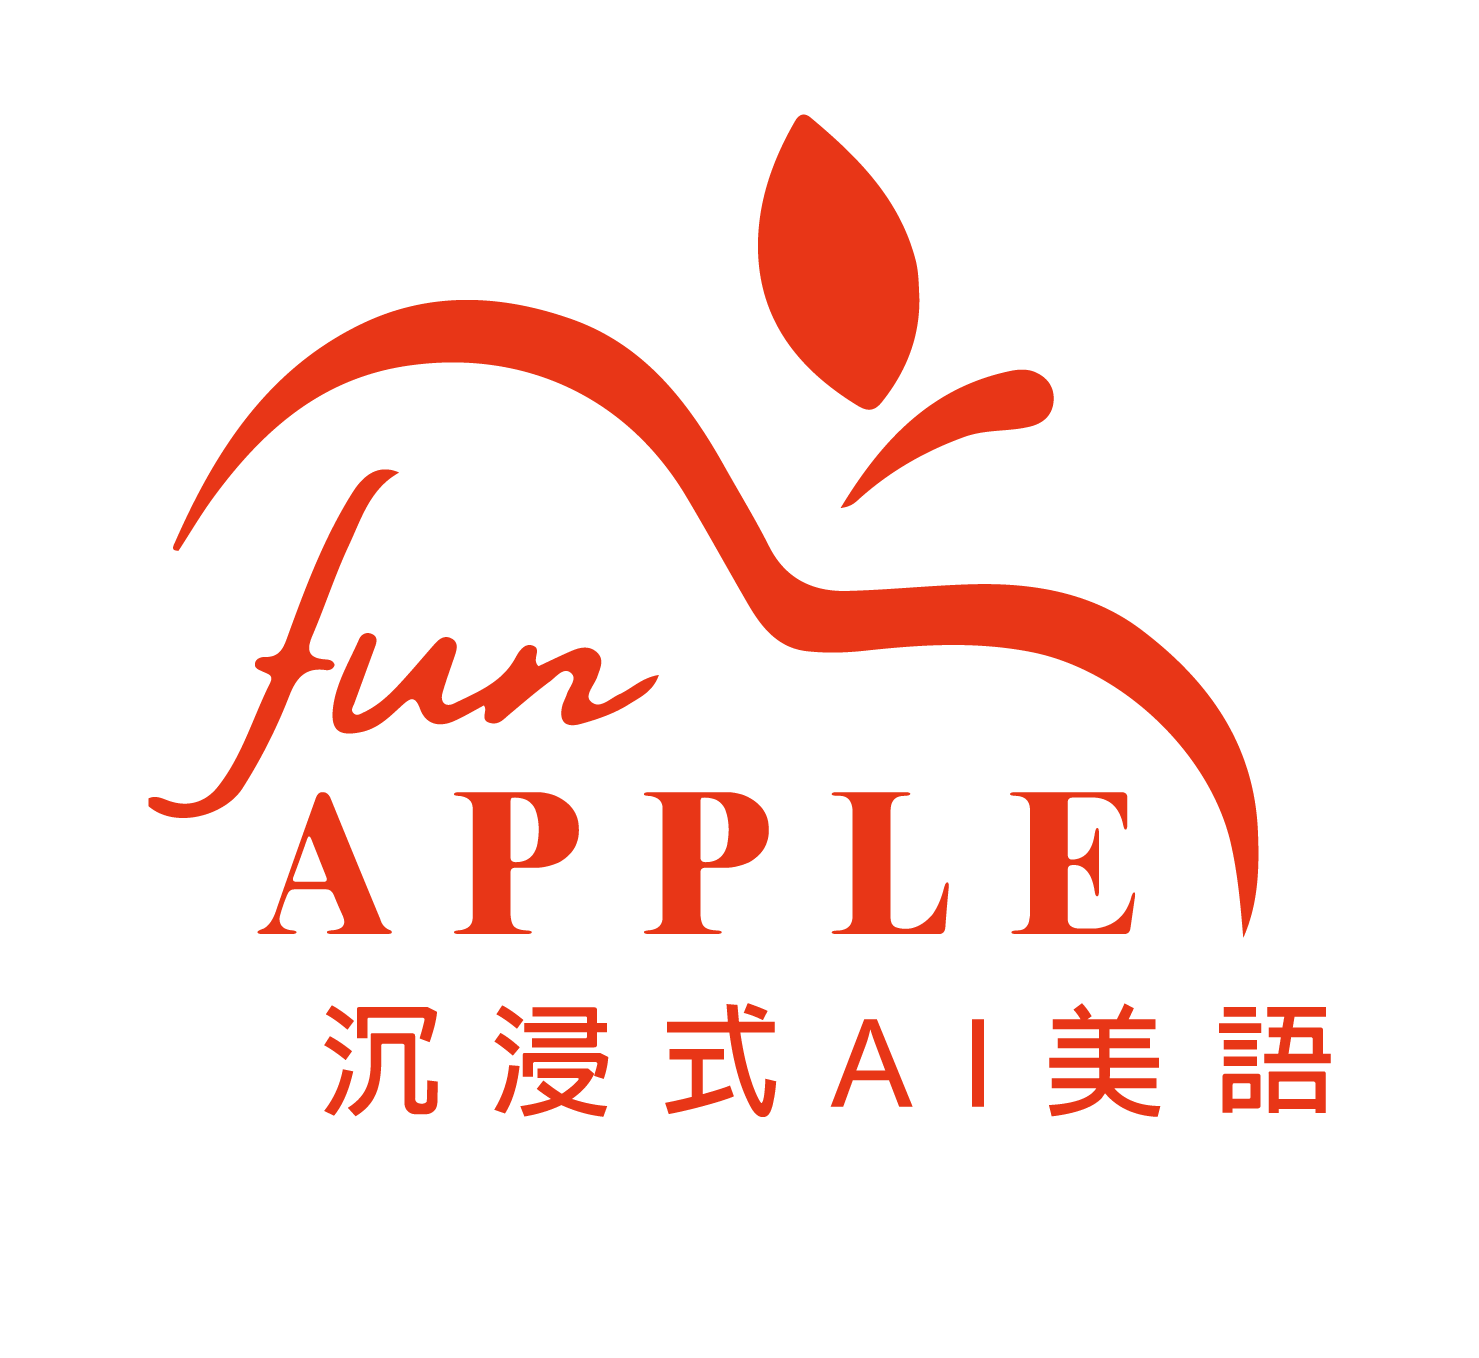 Teaching English and Living in Taiwan Jobs Available 教學工作, Fun Apple English School Looking for Native English speaker to be our FULL-TIME or PART-TIME ESL teacher. image